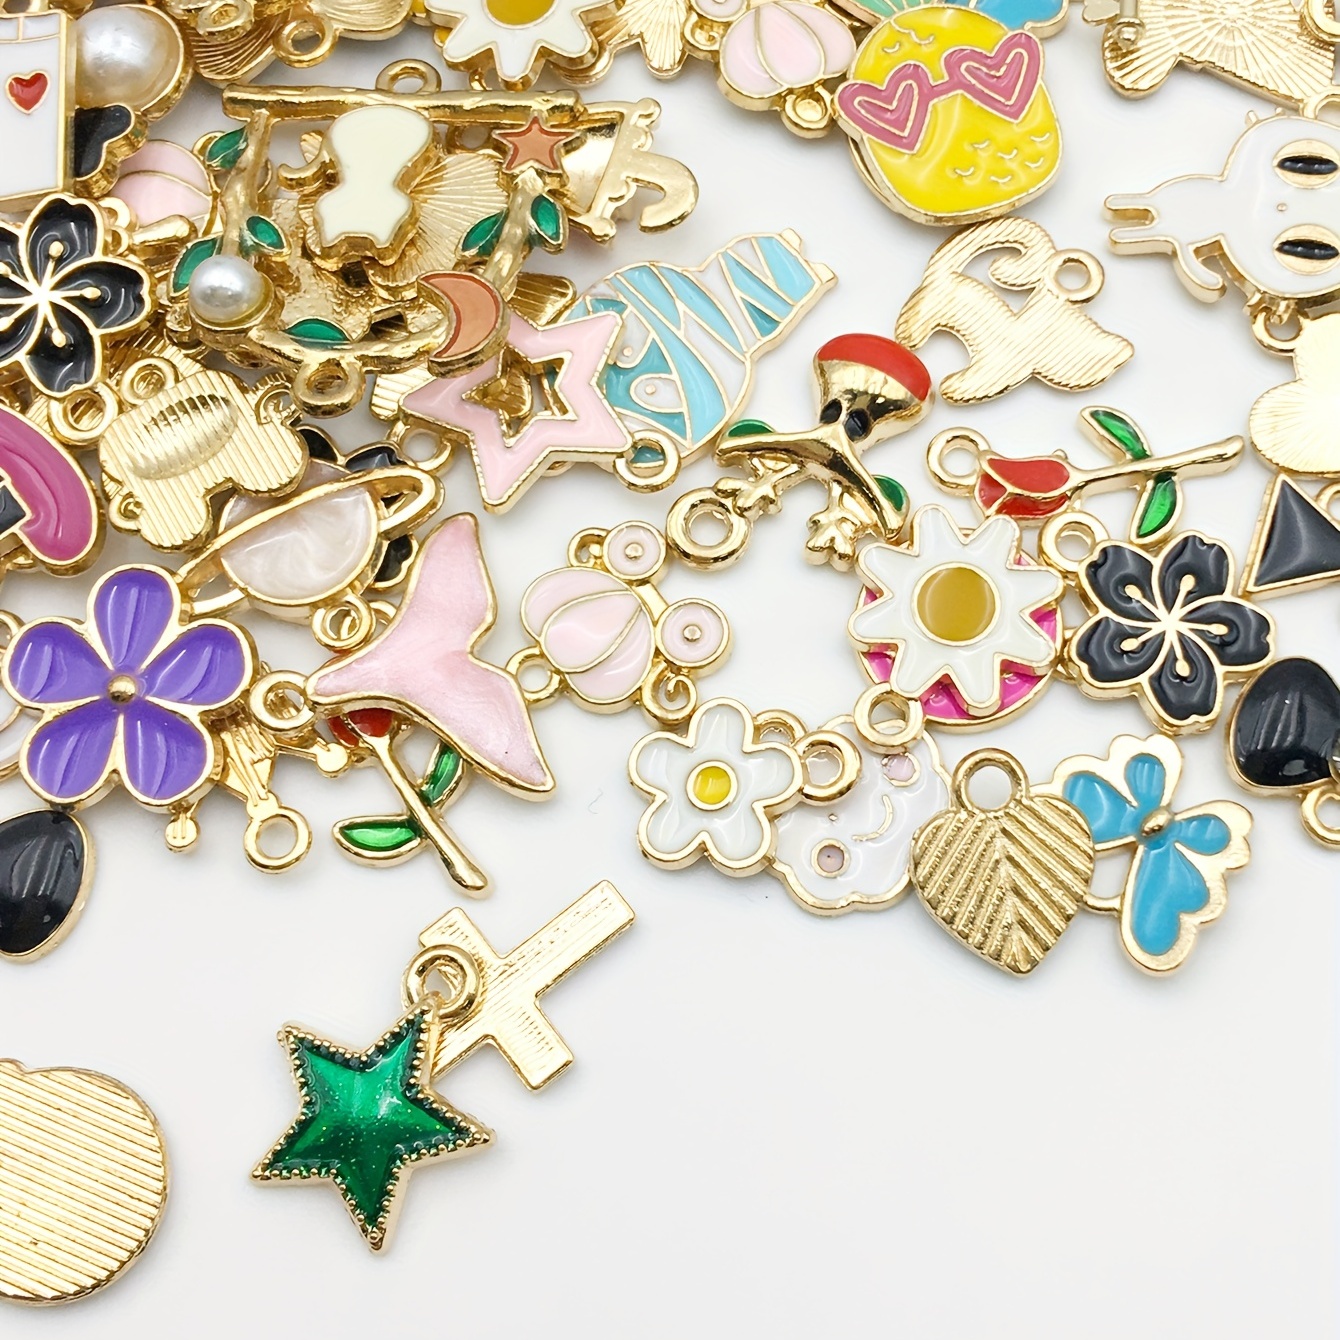  WEWAYSMILE 40 Pcs Gold Charms for Jewelry Making Gold Plated  Enamel Pendants 40 Styles Cute Charms for Bcracelet Earring Necklace  Keychain DIY Jewelry Making Craft Supplies : Arts, Crafts & Sewing